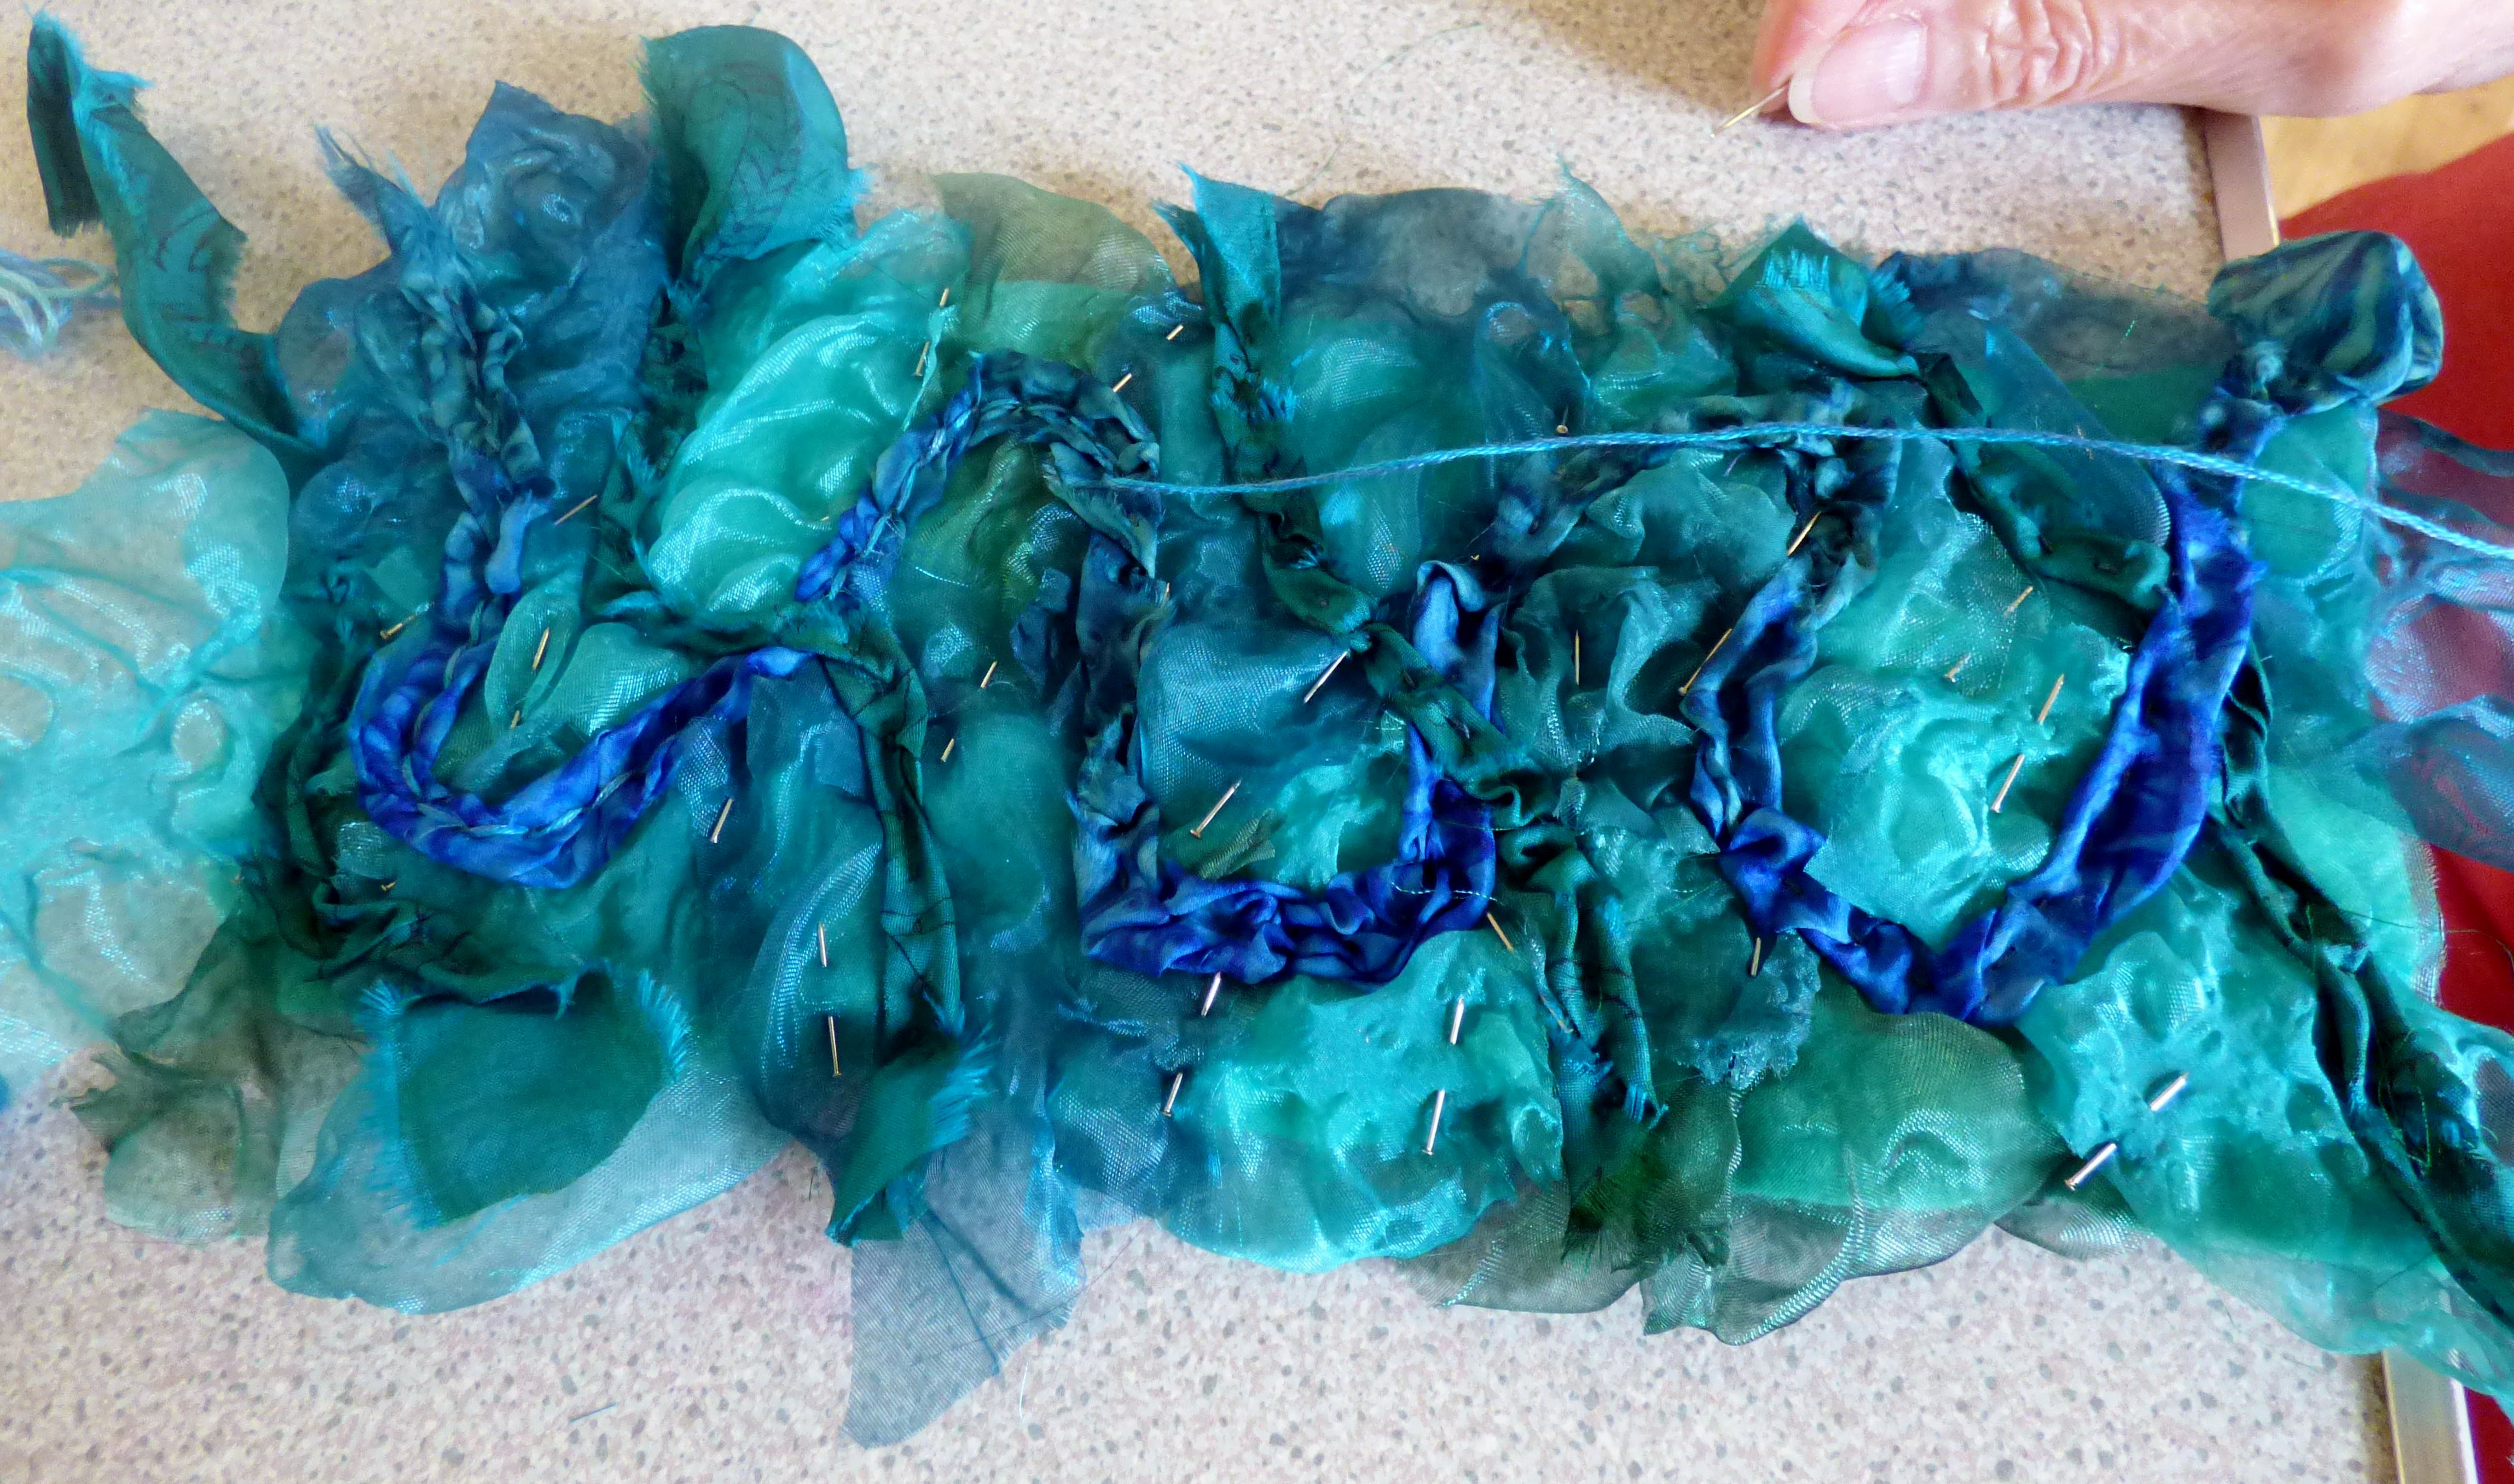 student's work in progress at "Creating with Sari Silk" workshop with Diane Moore, Feb 2023